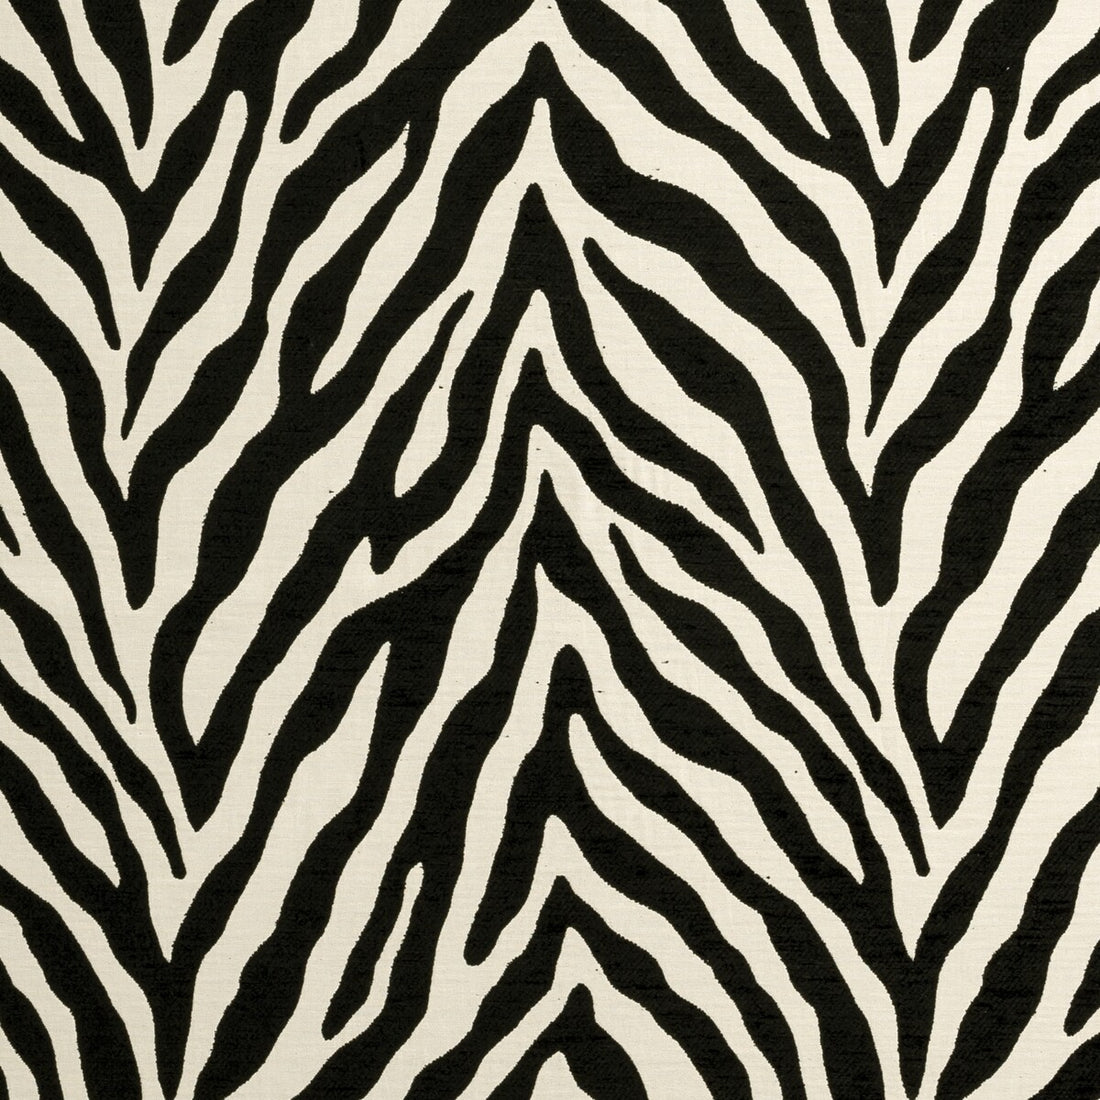 Bw1029 fabric in black/white color - pattern F0902/01.CAC.0 - by Clarke And Clarke in the Clarke &amp; Clarke Black + White collection